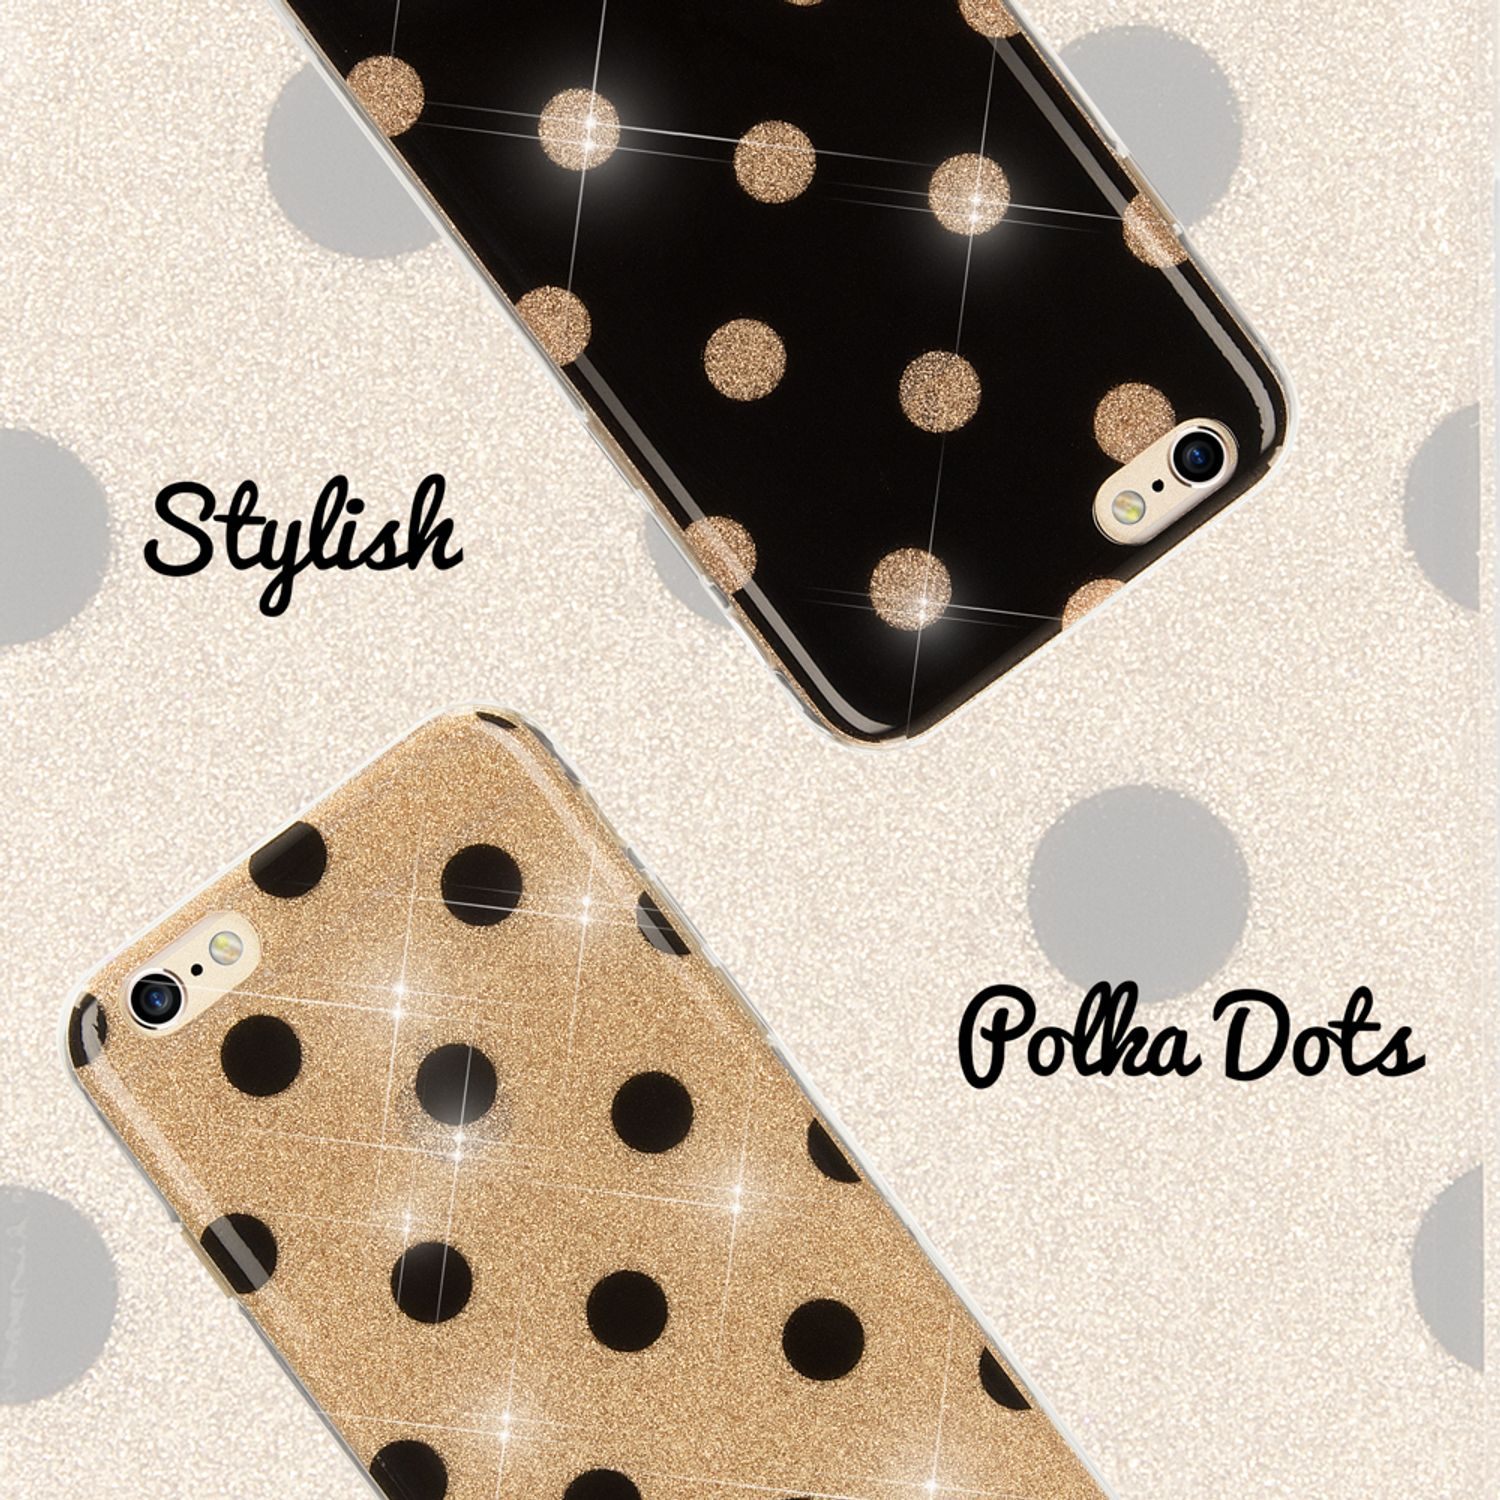 Gold NALIA 6 iPhone 6s, Backcover, Apple, Punkte iPhone Hülle,